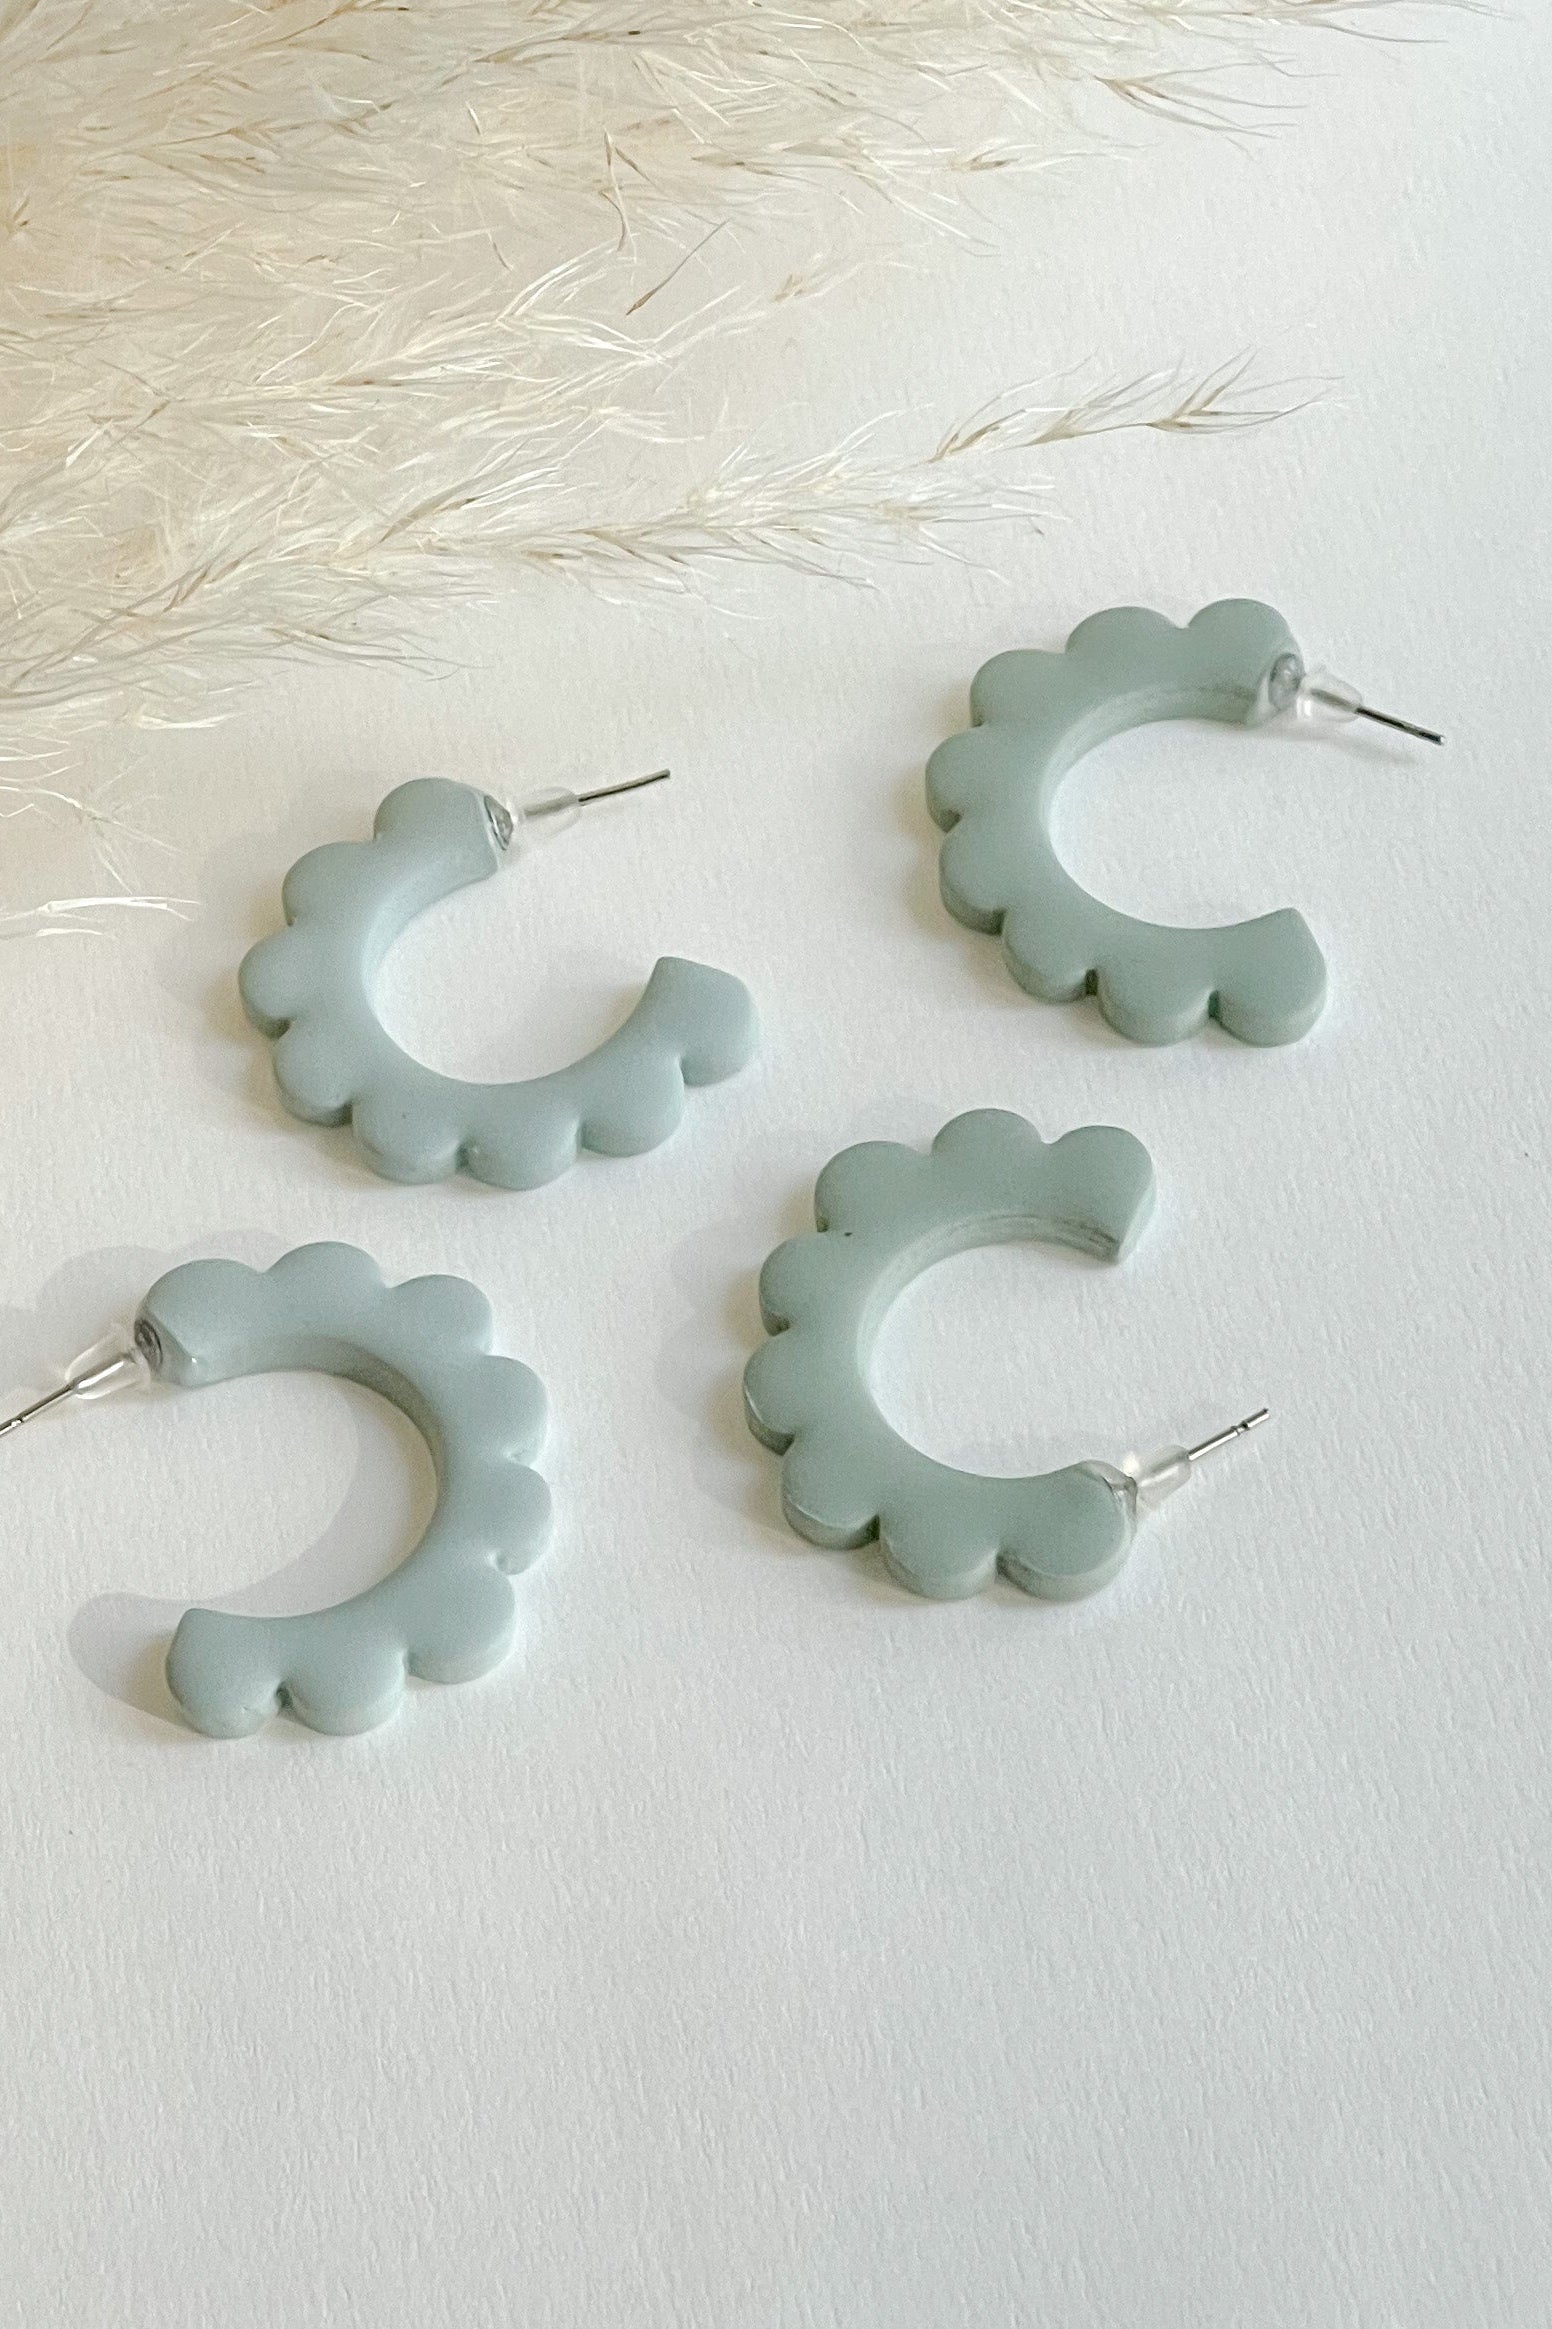 Clay Earrings | Scalloped Hoops Kush Life Designs